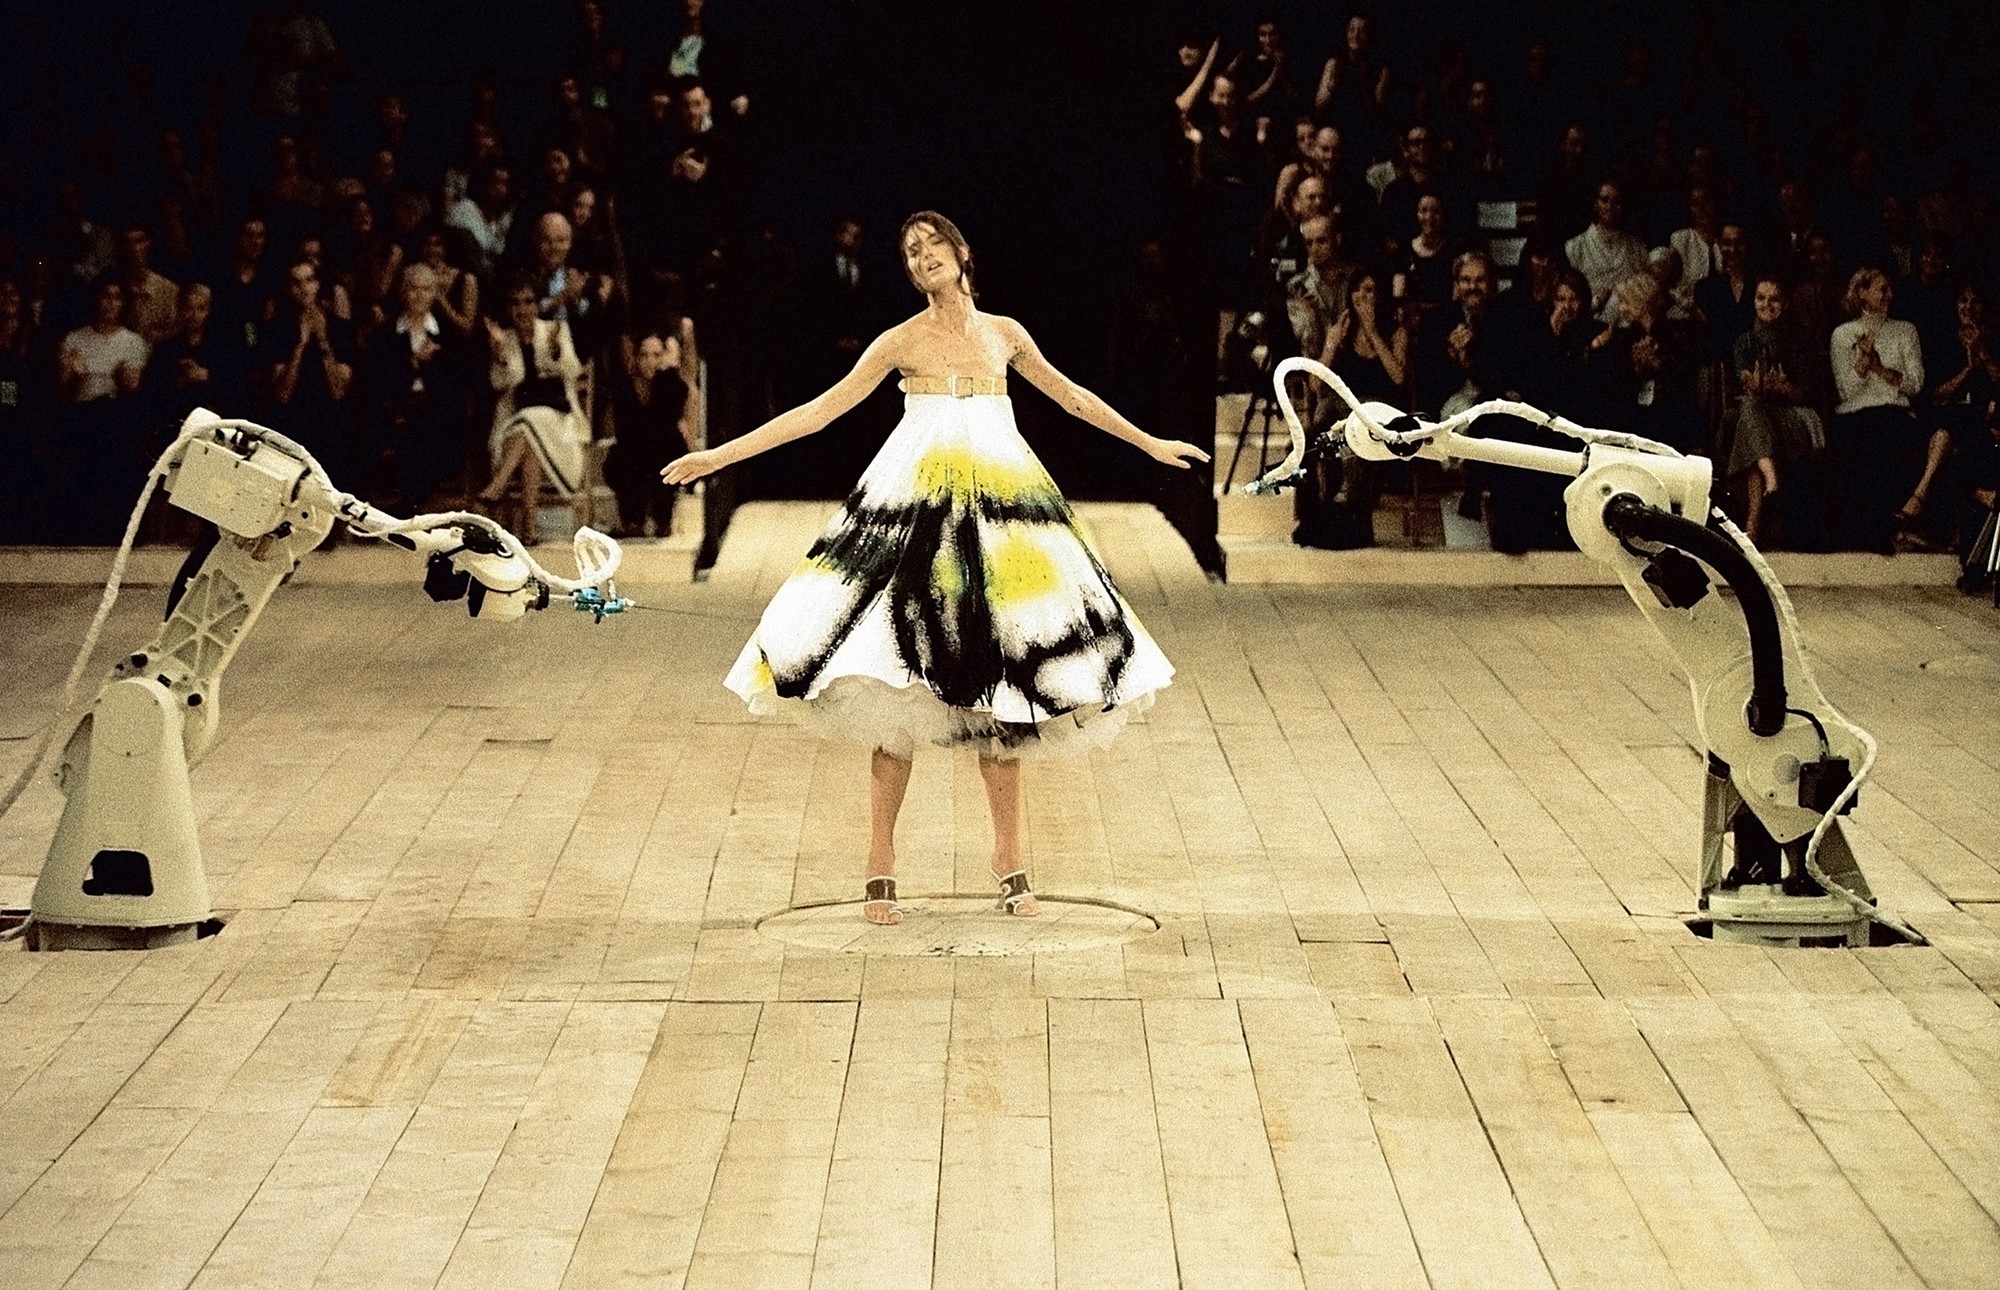 Models, Muses, And Designers Mourn The Loss Of Alexander McQueen In London